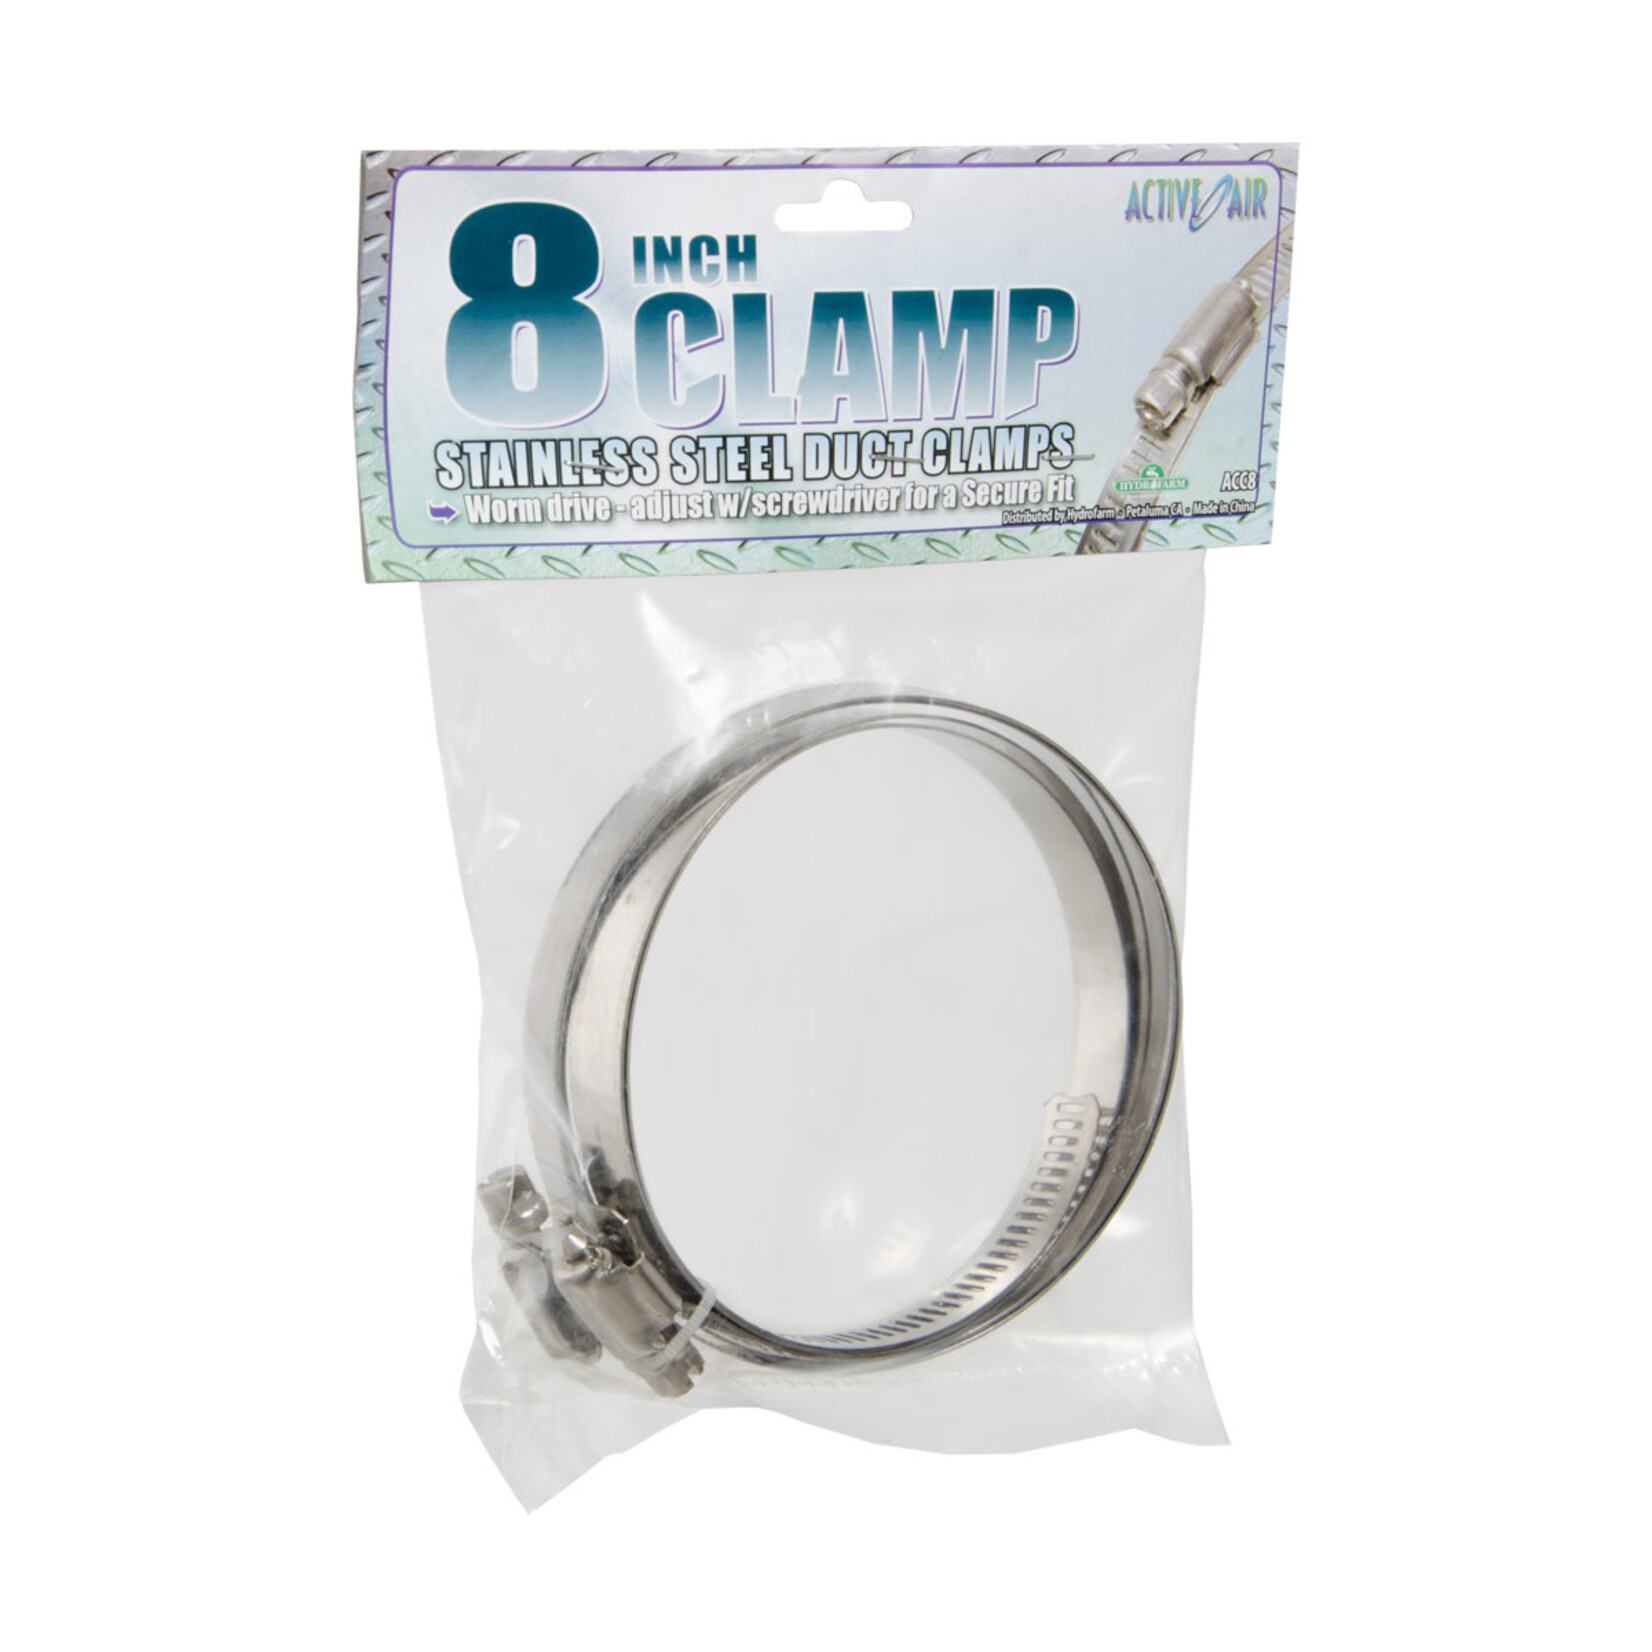 Active Air Stainless Steel Duct Clamps - 8in - 2 pack